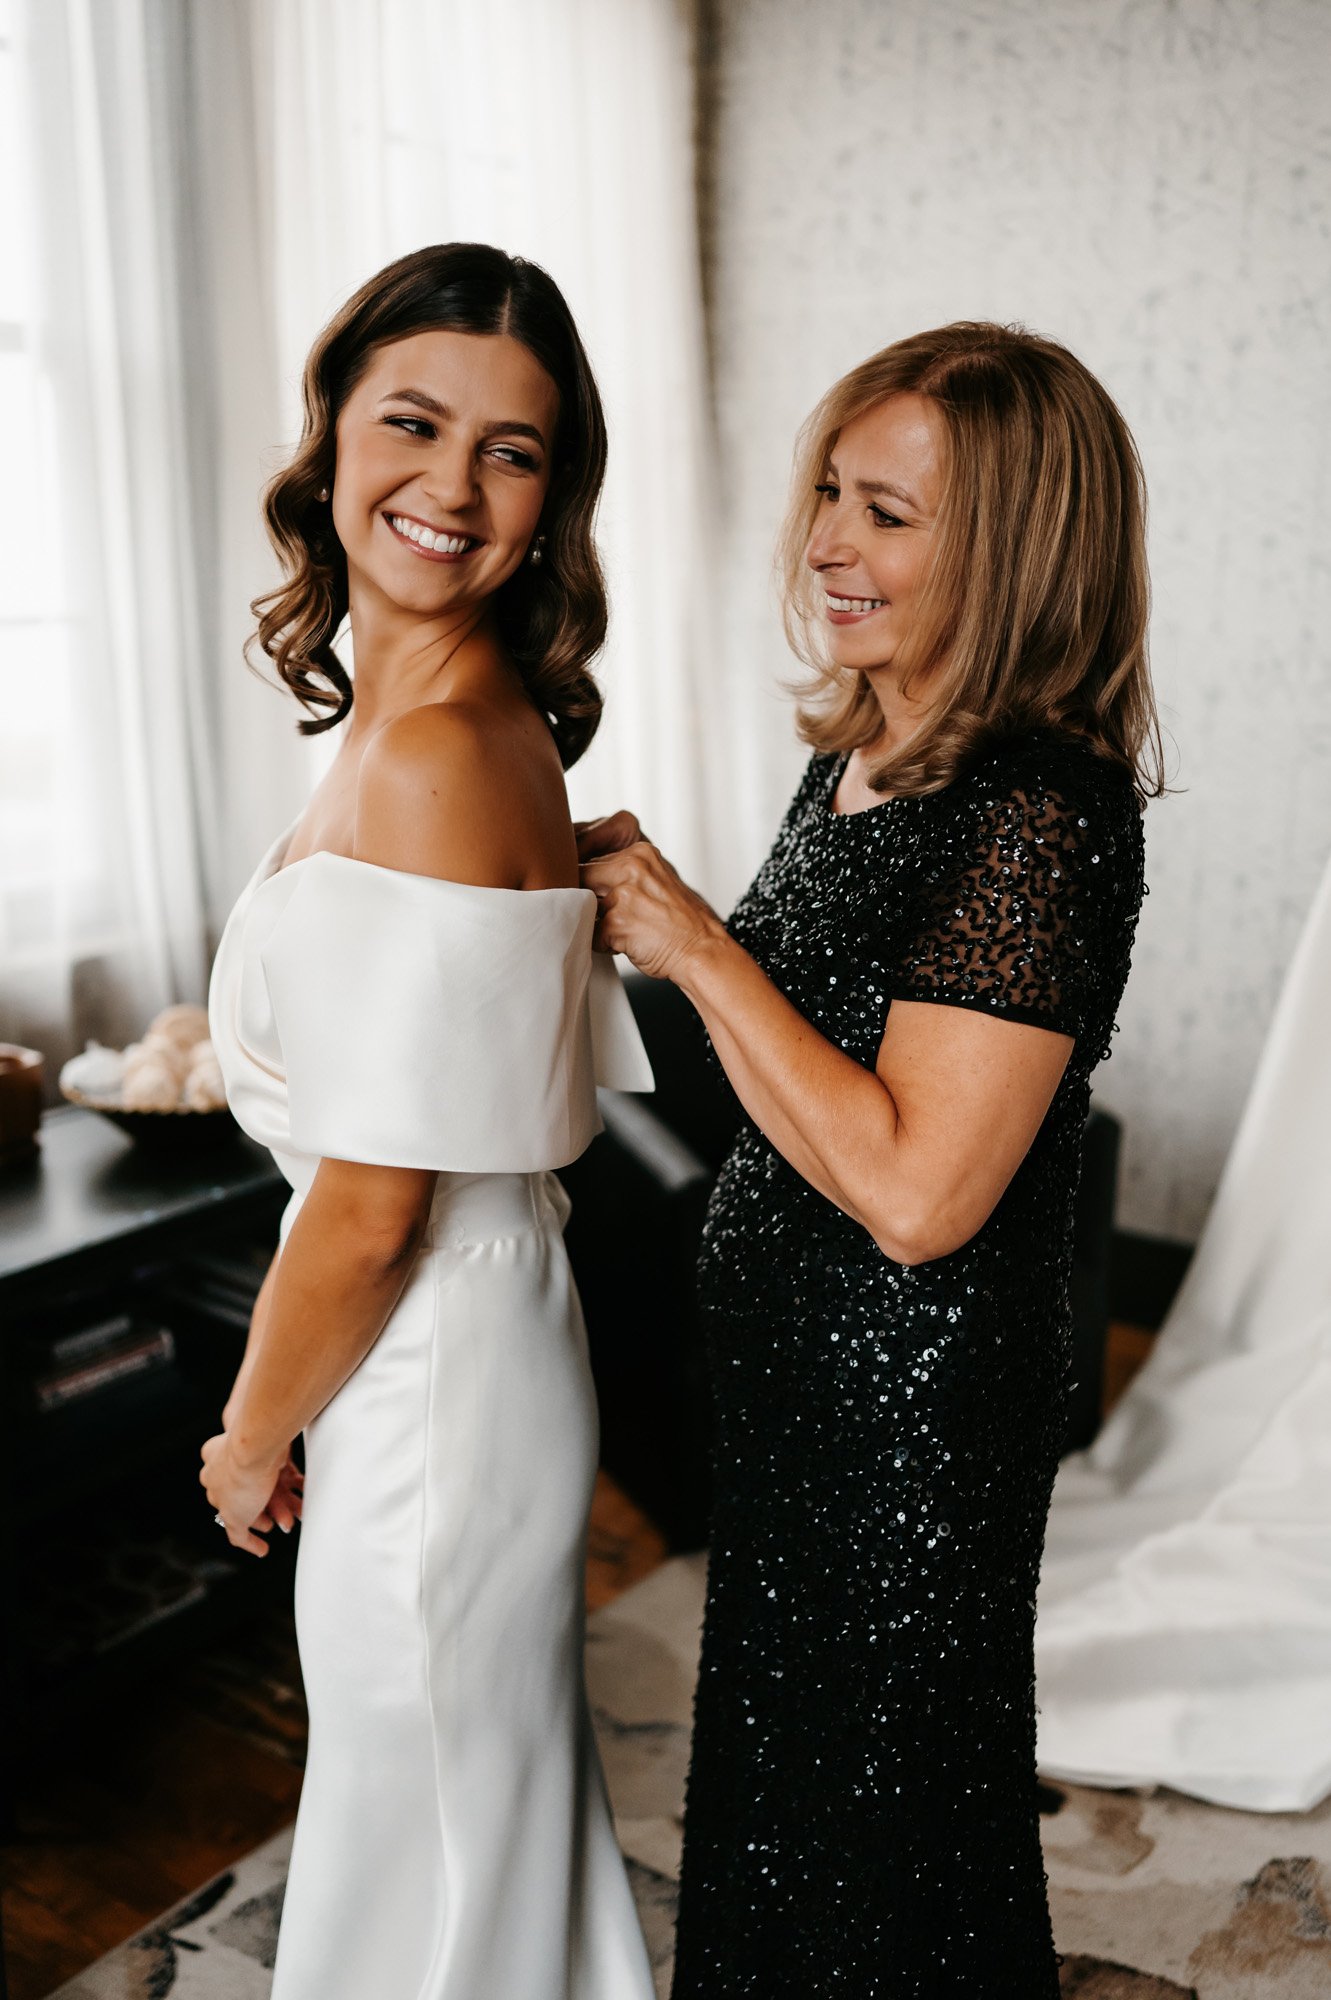 the bride and mother of the bride getting ready together in a modern white setting